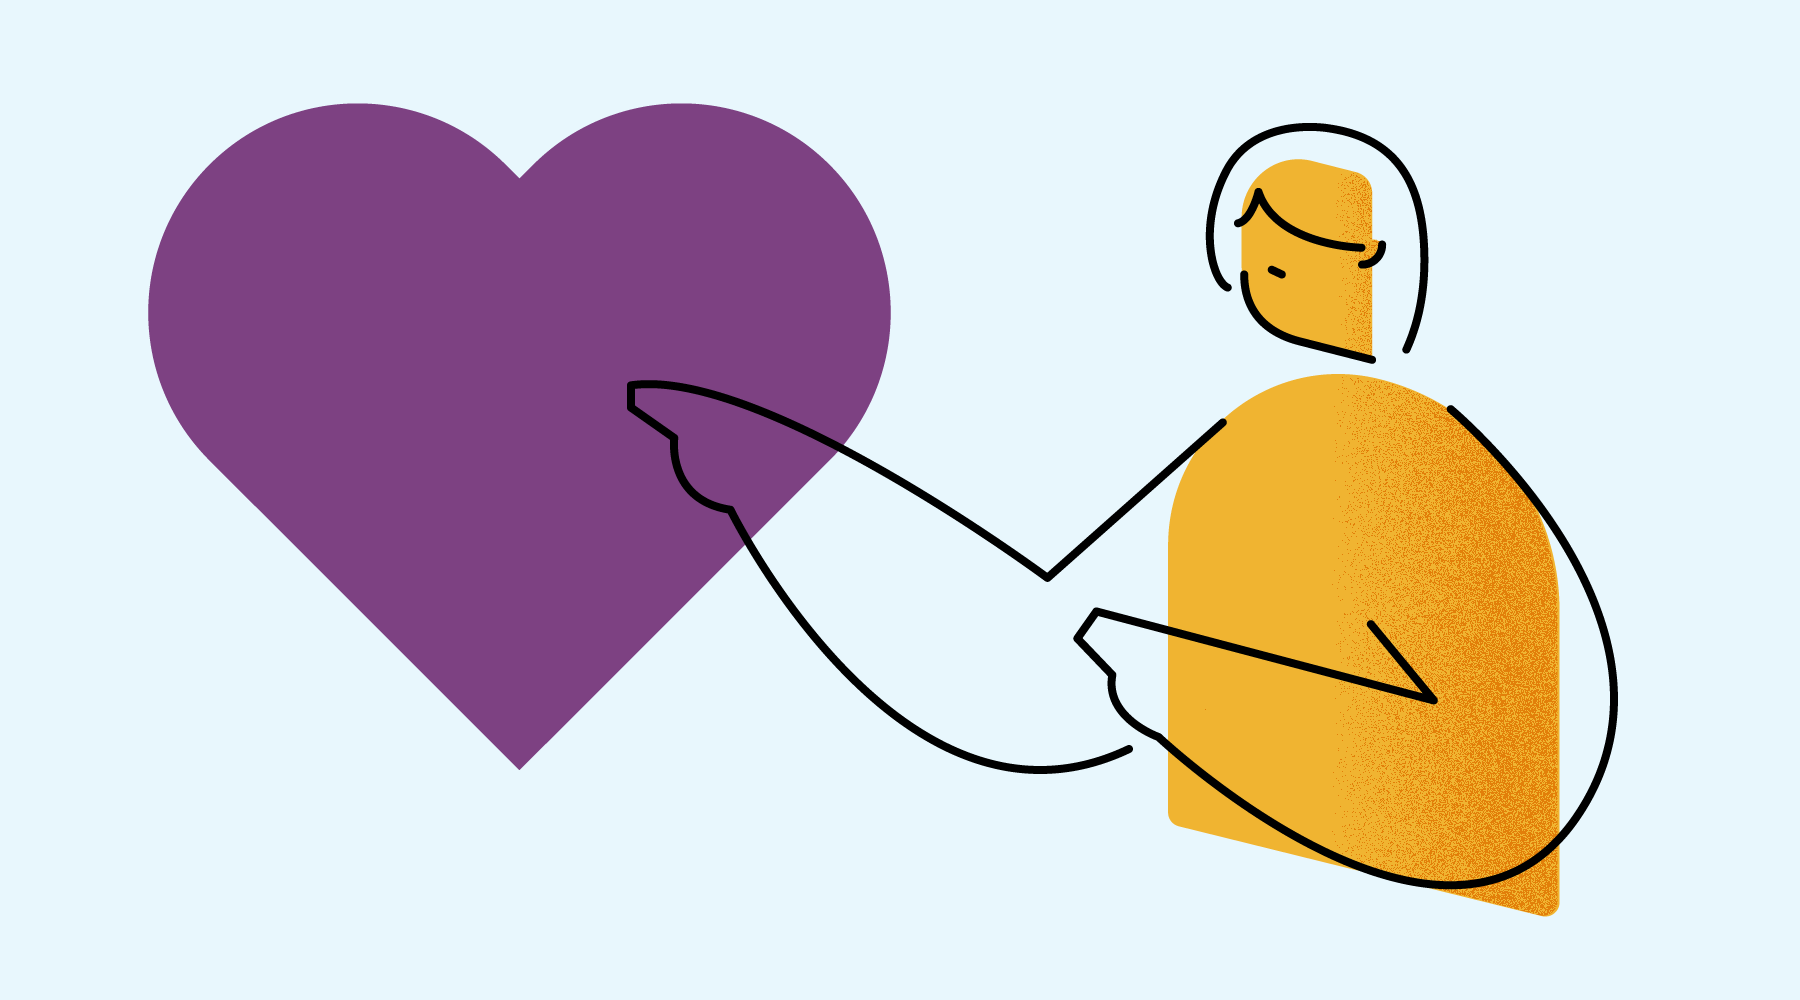 A person pointing at a large purple heart.